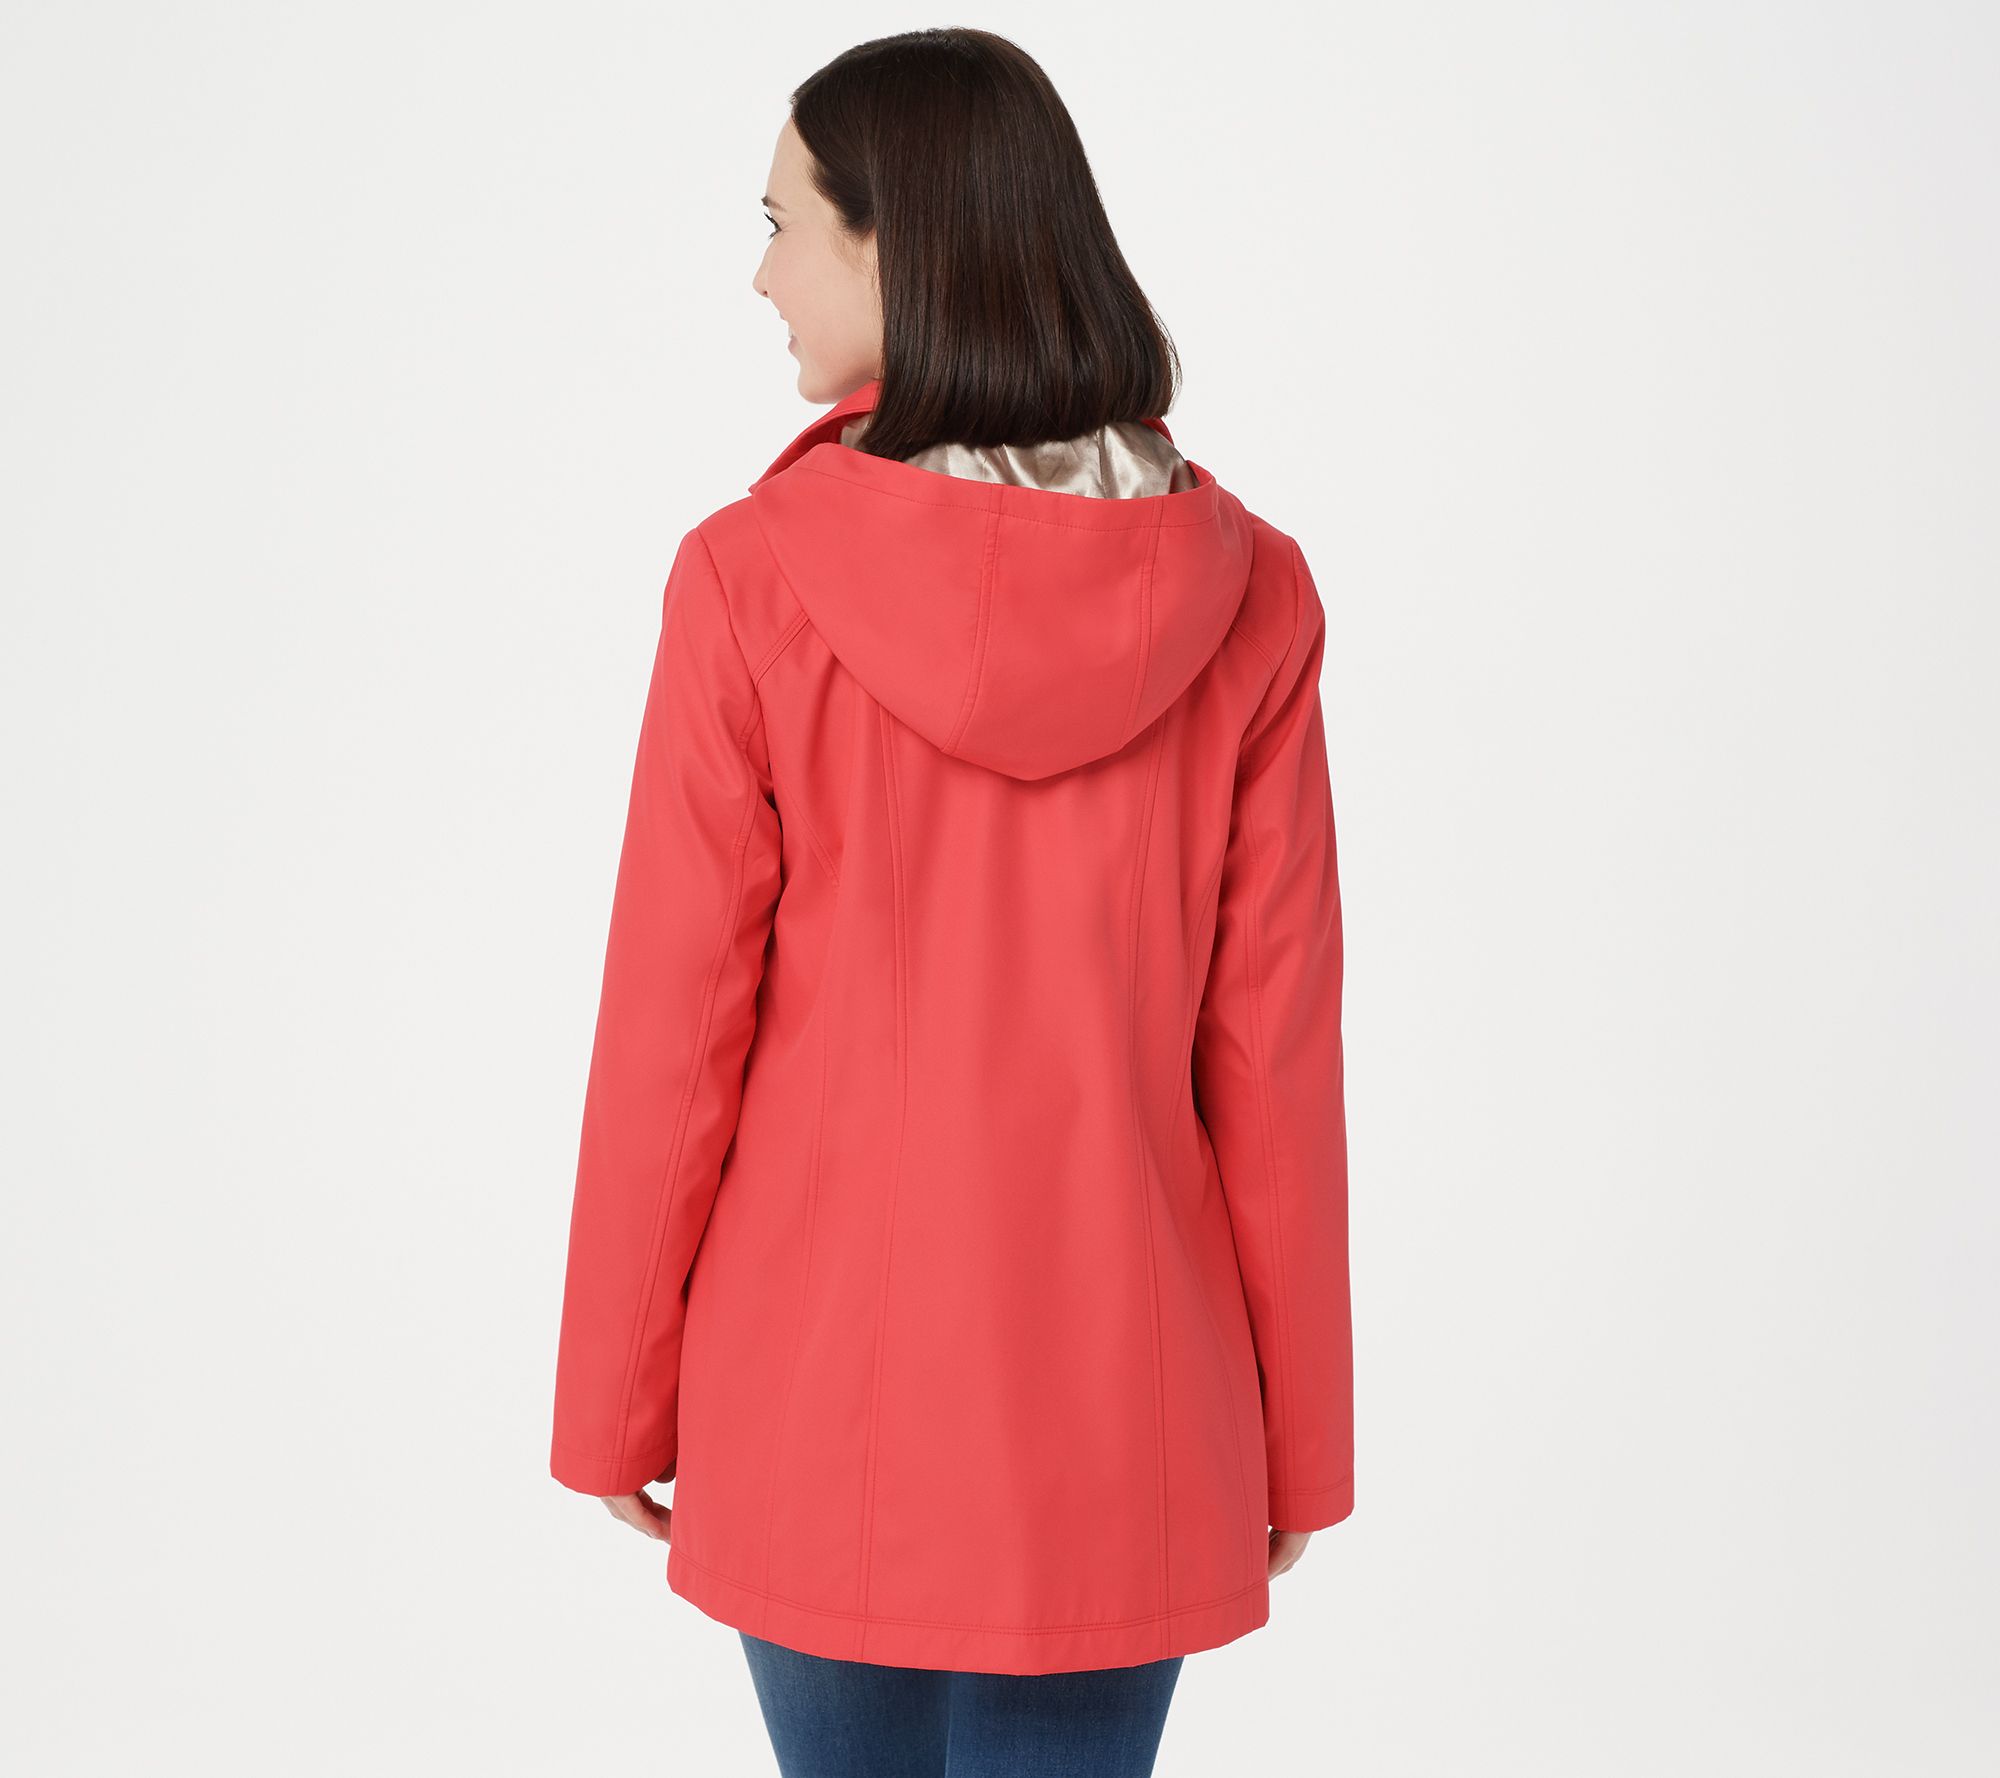 Dennis Basso Water Resistant Zip-Front Jacket with Removable Hood - QVC.com